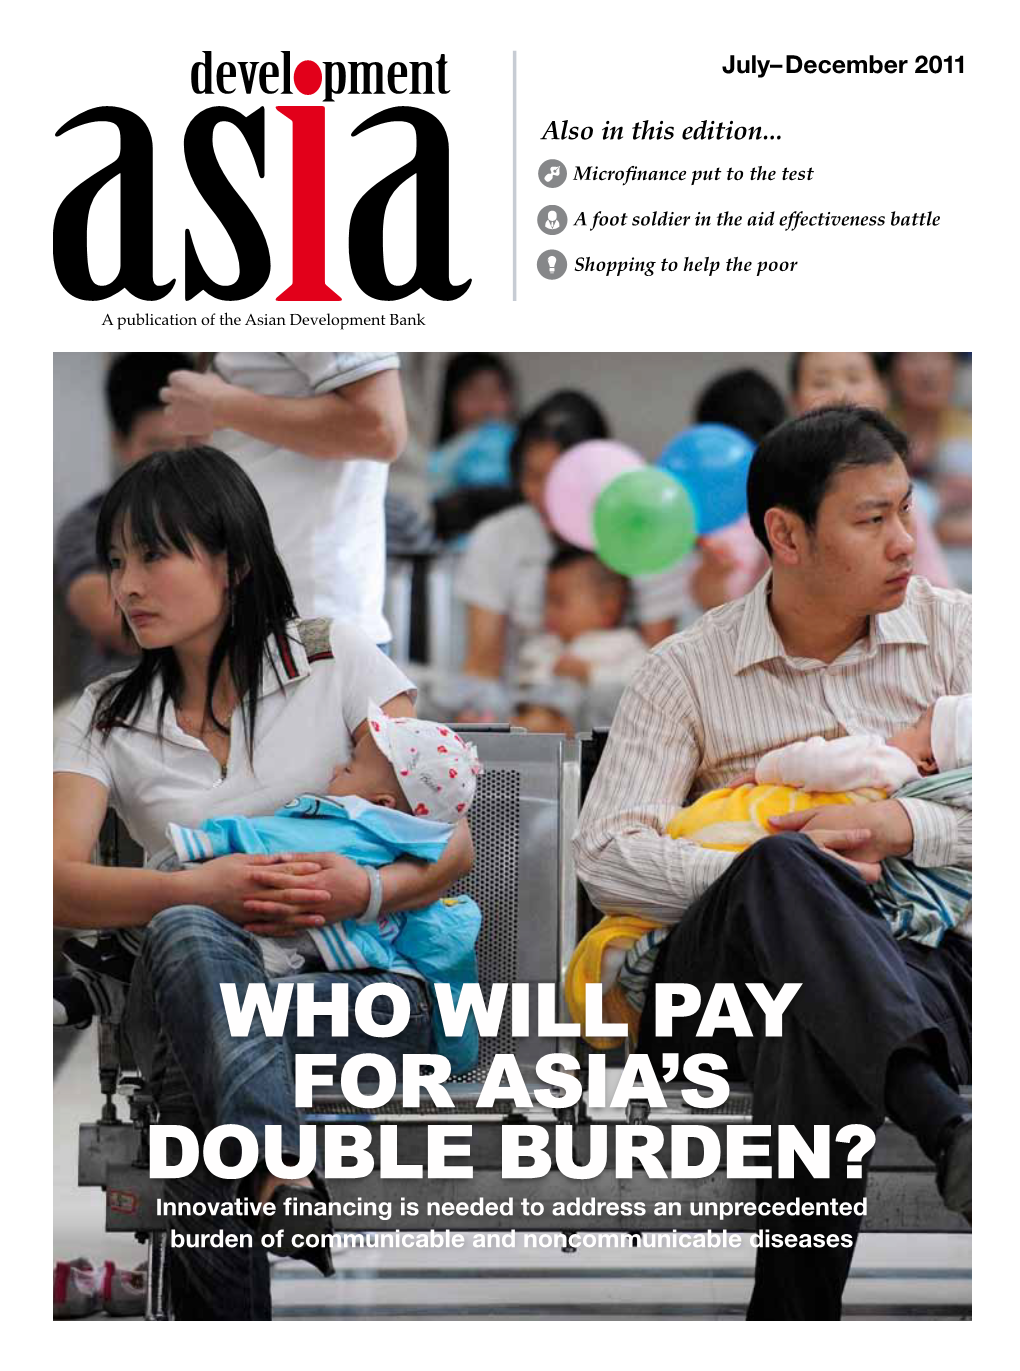 Who Will Pay for Asia's Double Burden?